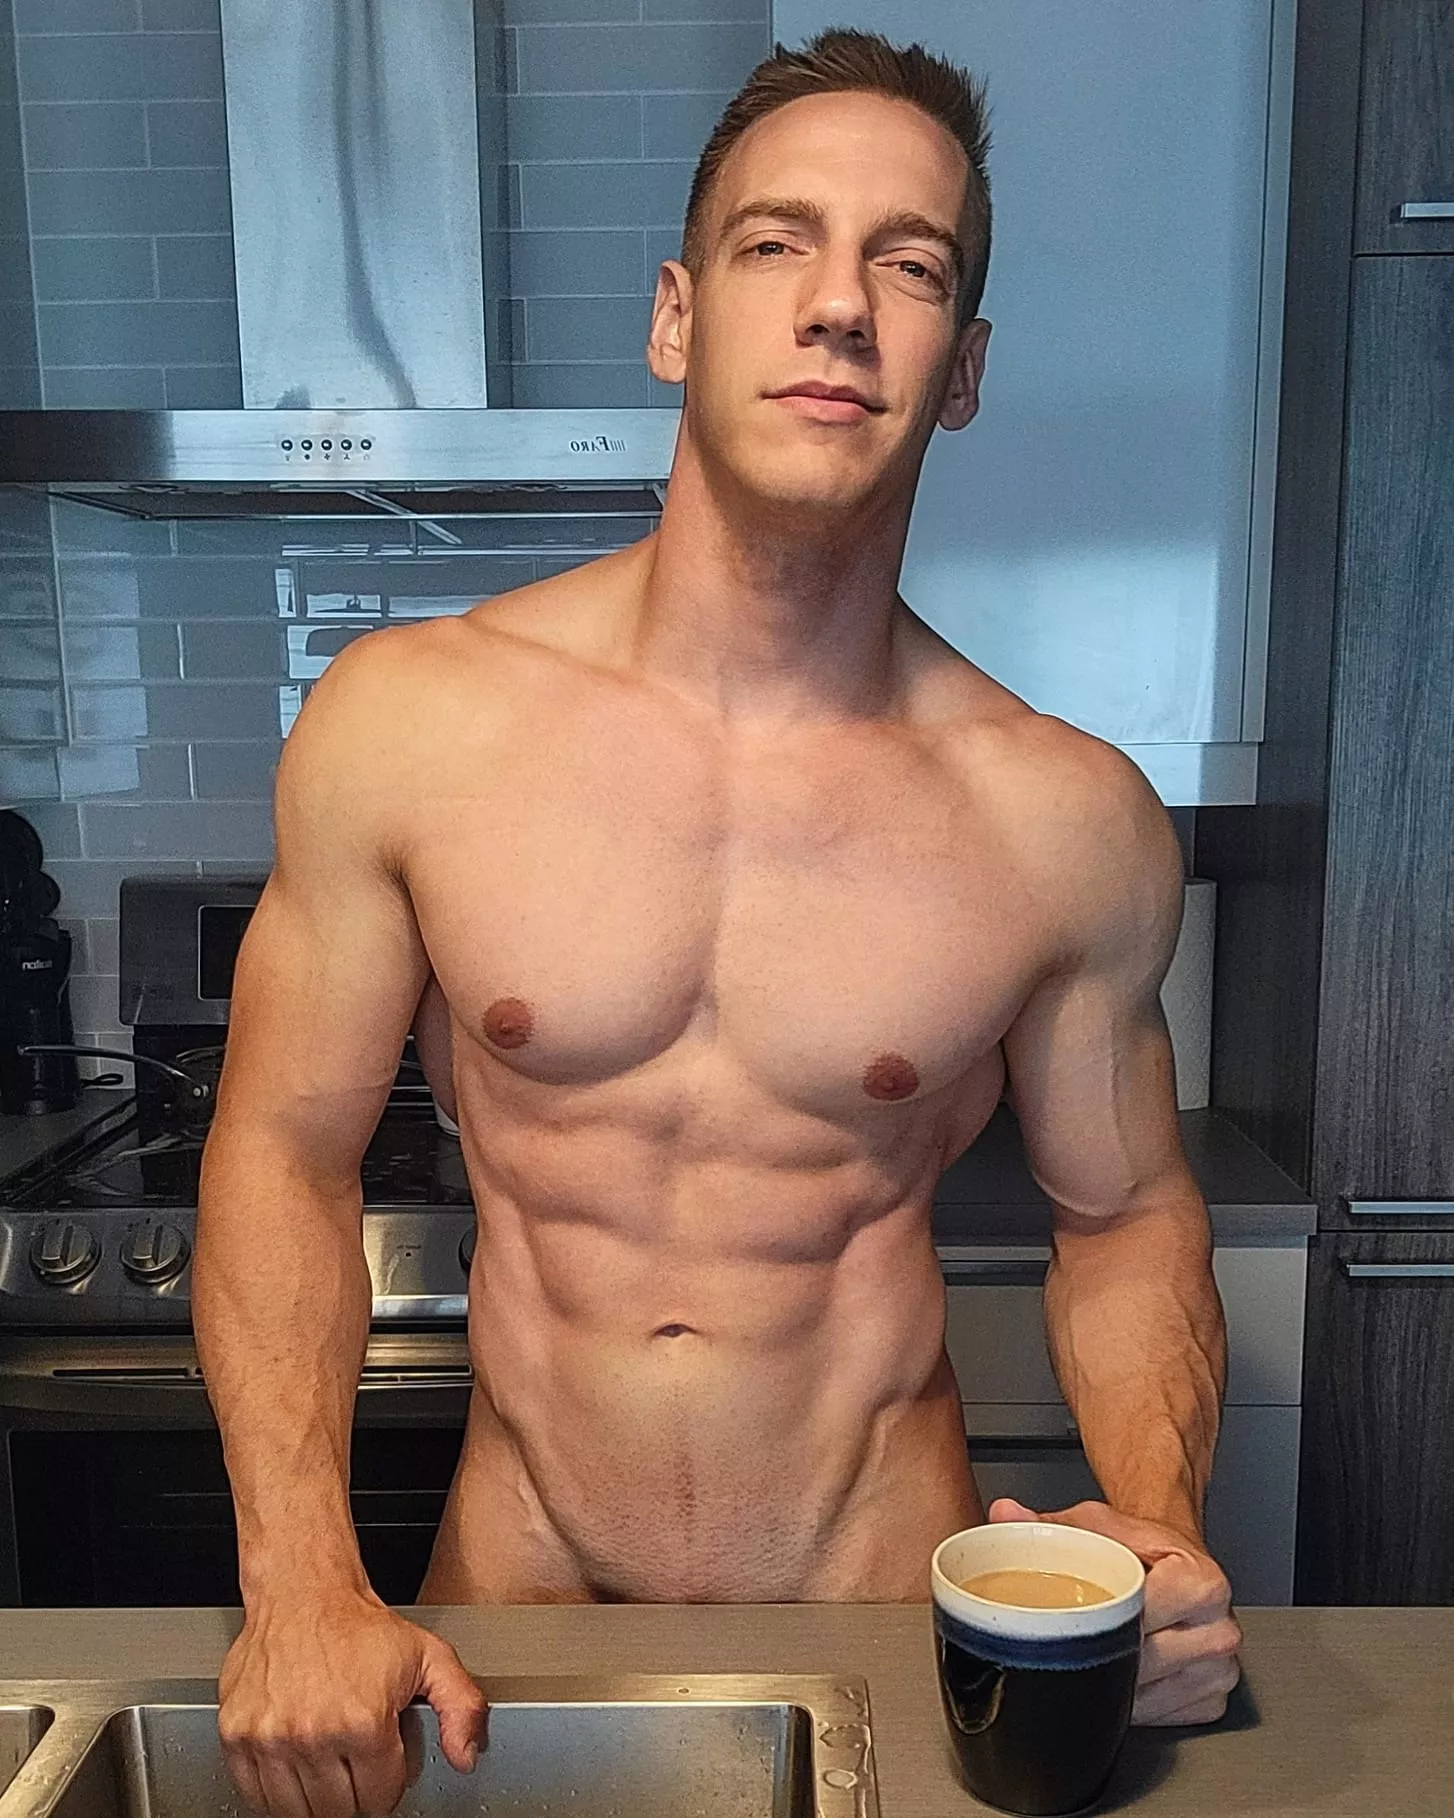 Coffee to boost your monday 😉 ☕? nudes.